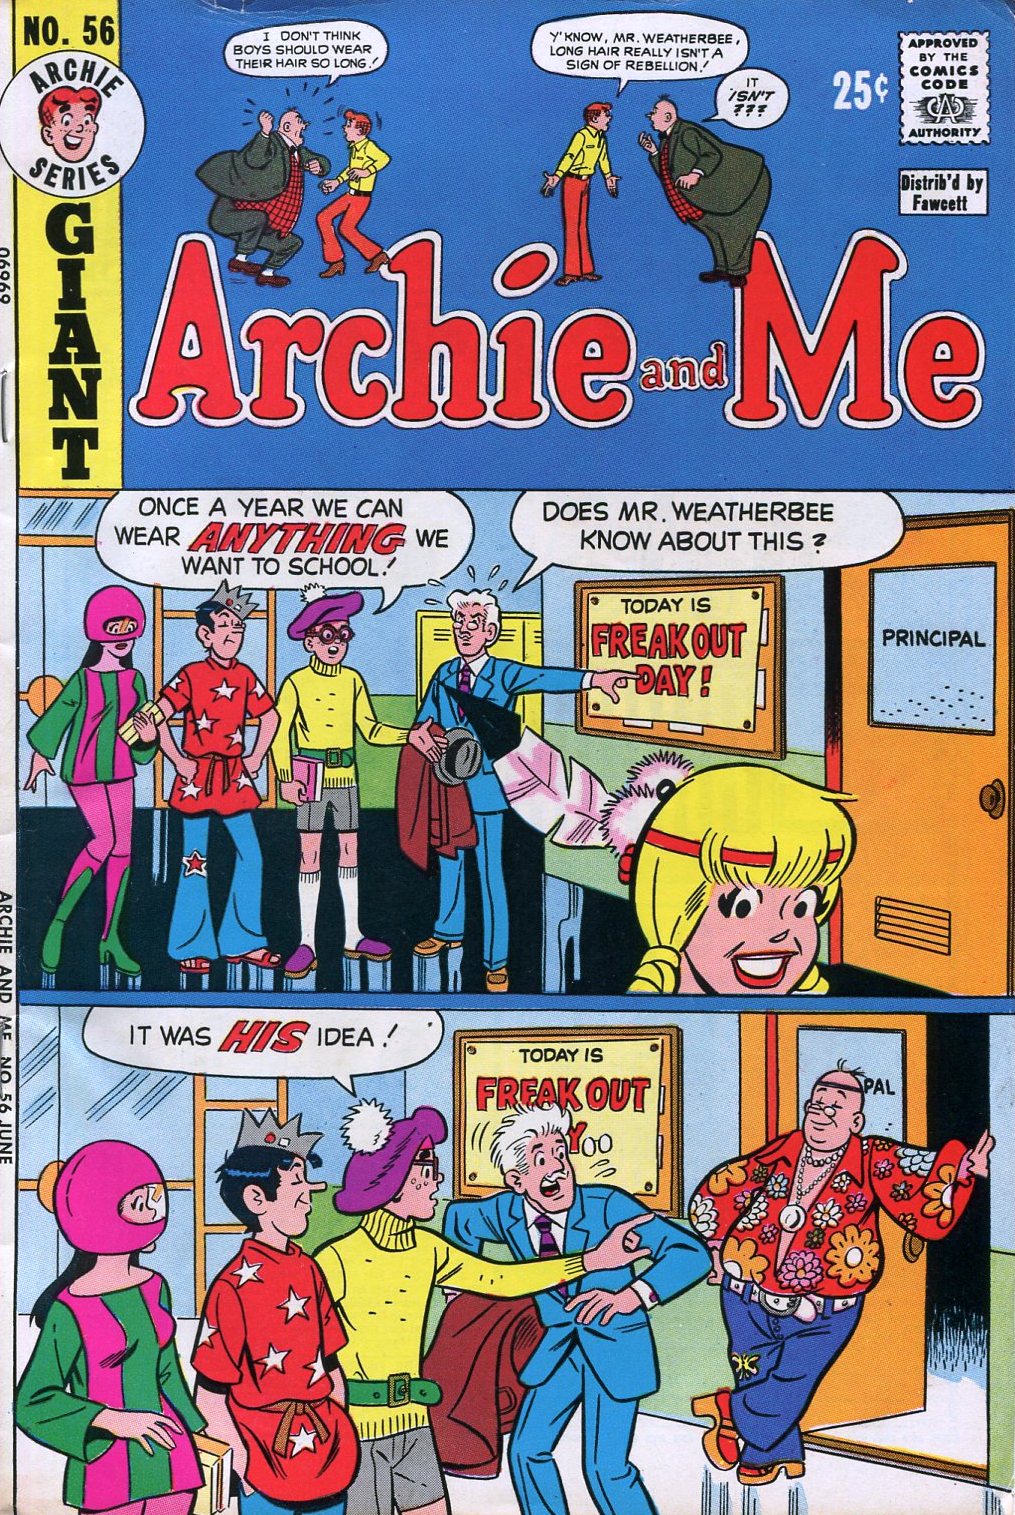 Read online Archie and Me comic -  Issue #56 - 1